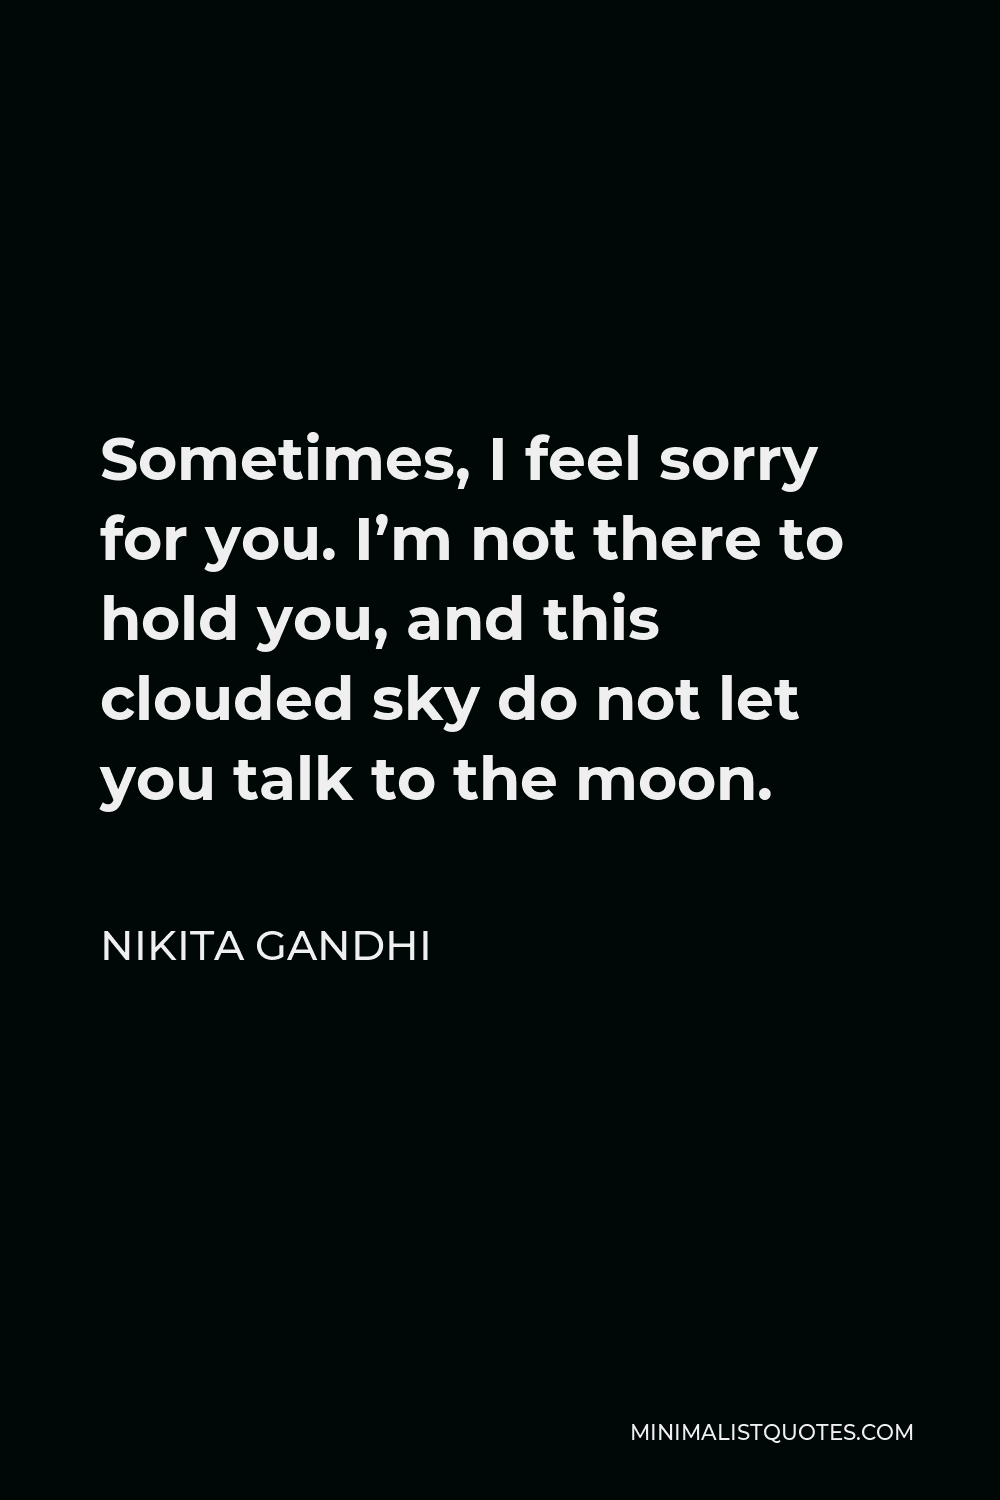 Nikita Gandhi Quote - Sometimes, I feel sorry for you. I’m not there to hold you, and this clouded sky do not let you talk to the moon.